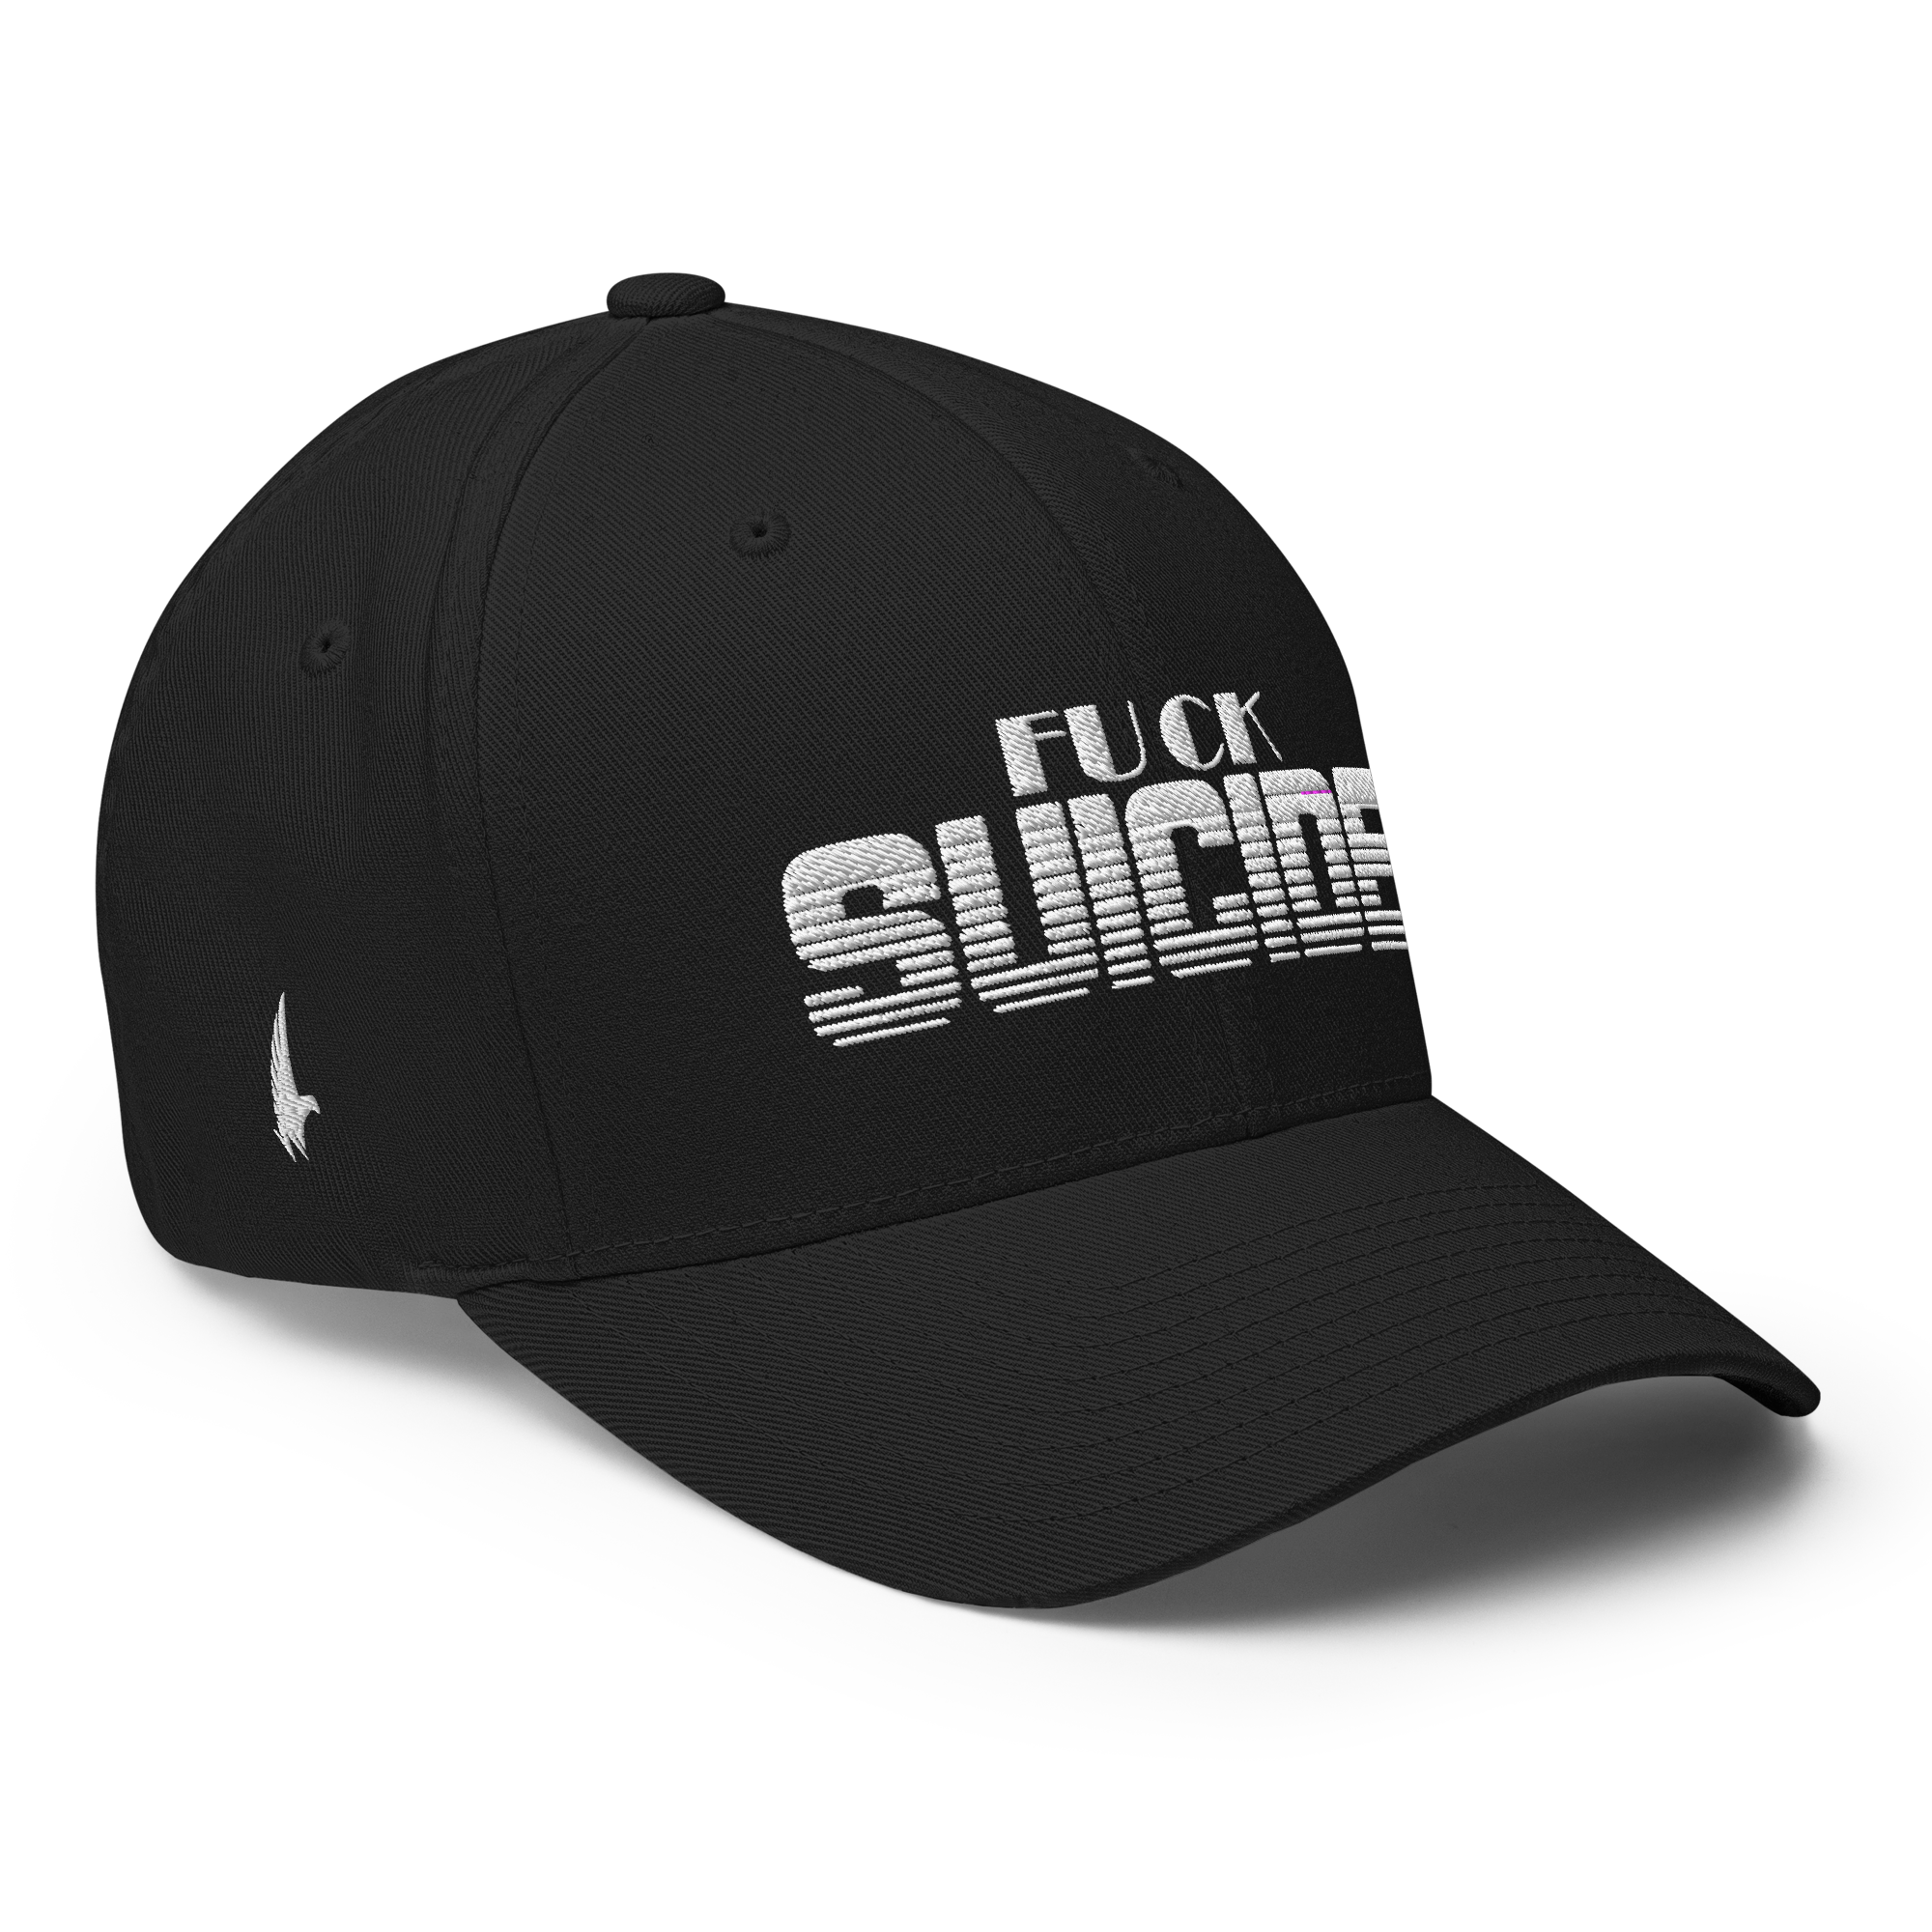 Fuck Suicide Fitted Hat Black Fitted - Loyalty Vibes